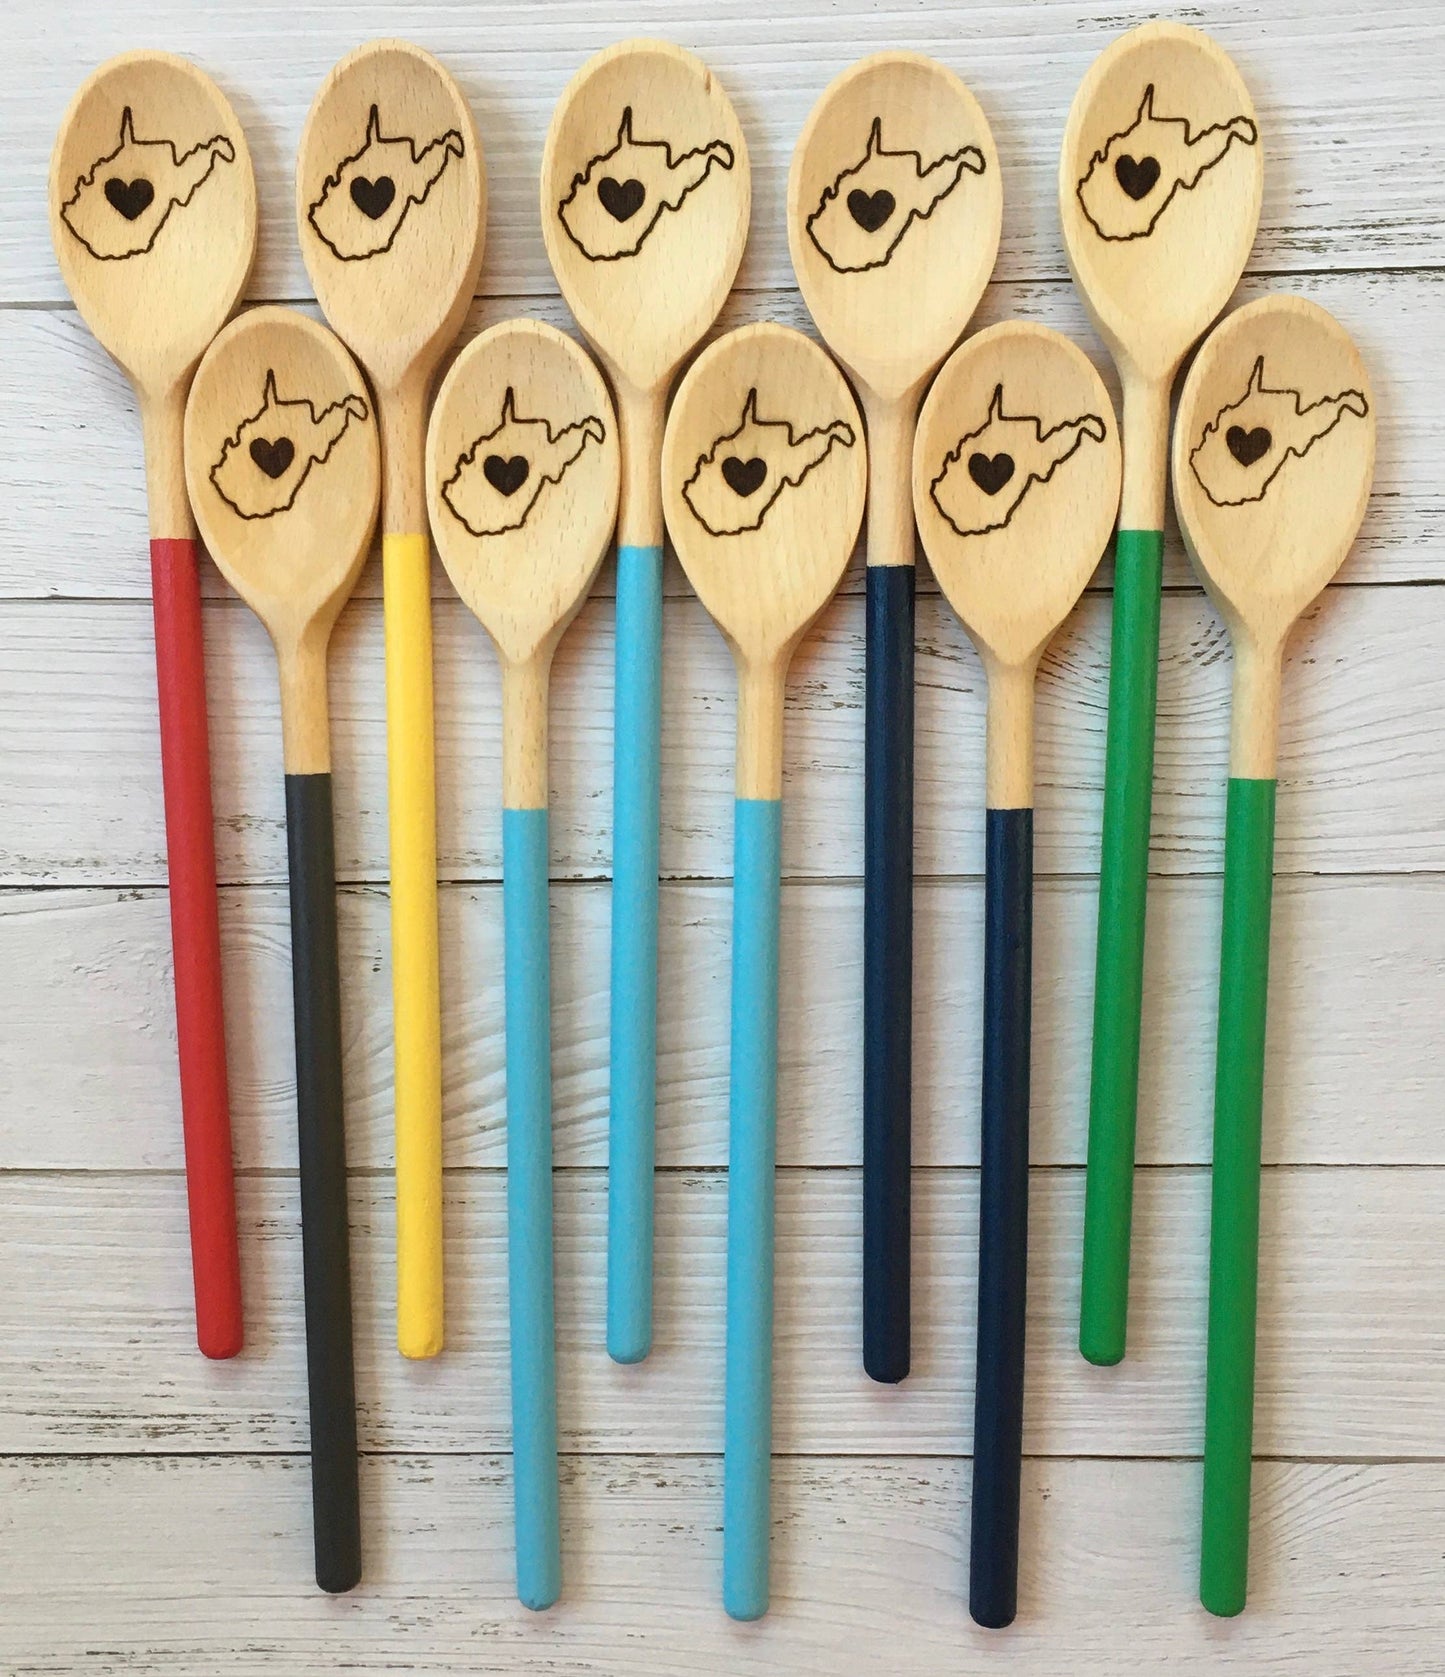 Wyo State Wooden Spoons